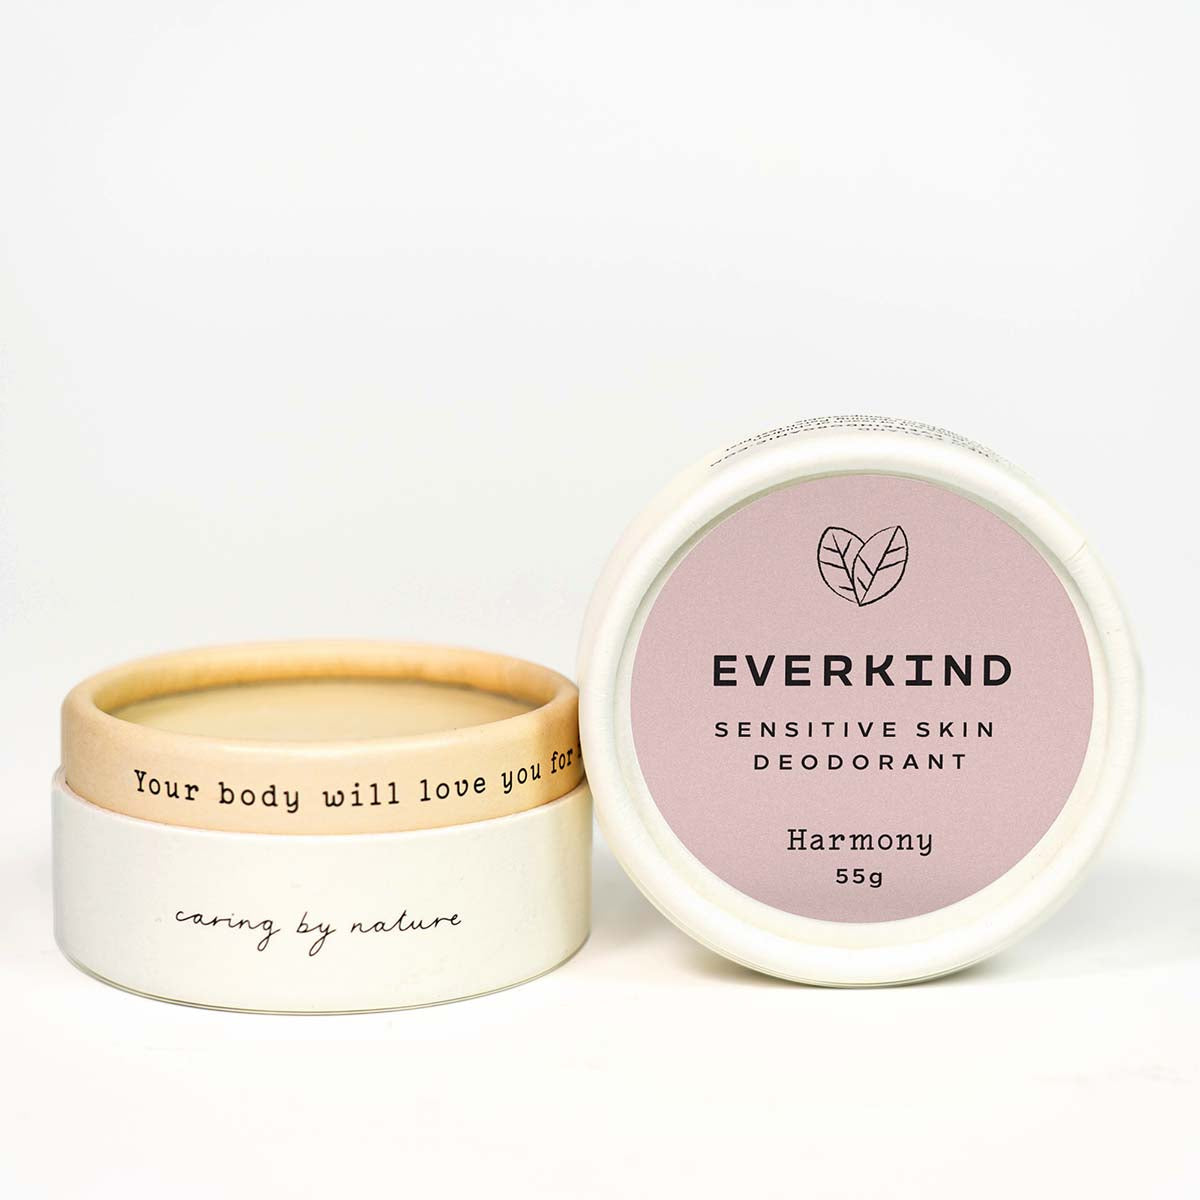 Everkind Harmony is a sensitive skin deodorant that is bicarb-free and scented with manuka and lavender. Packaged in a home compostable paper jar.